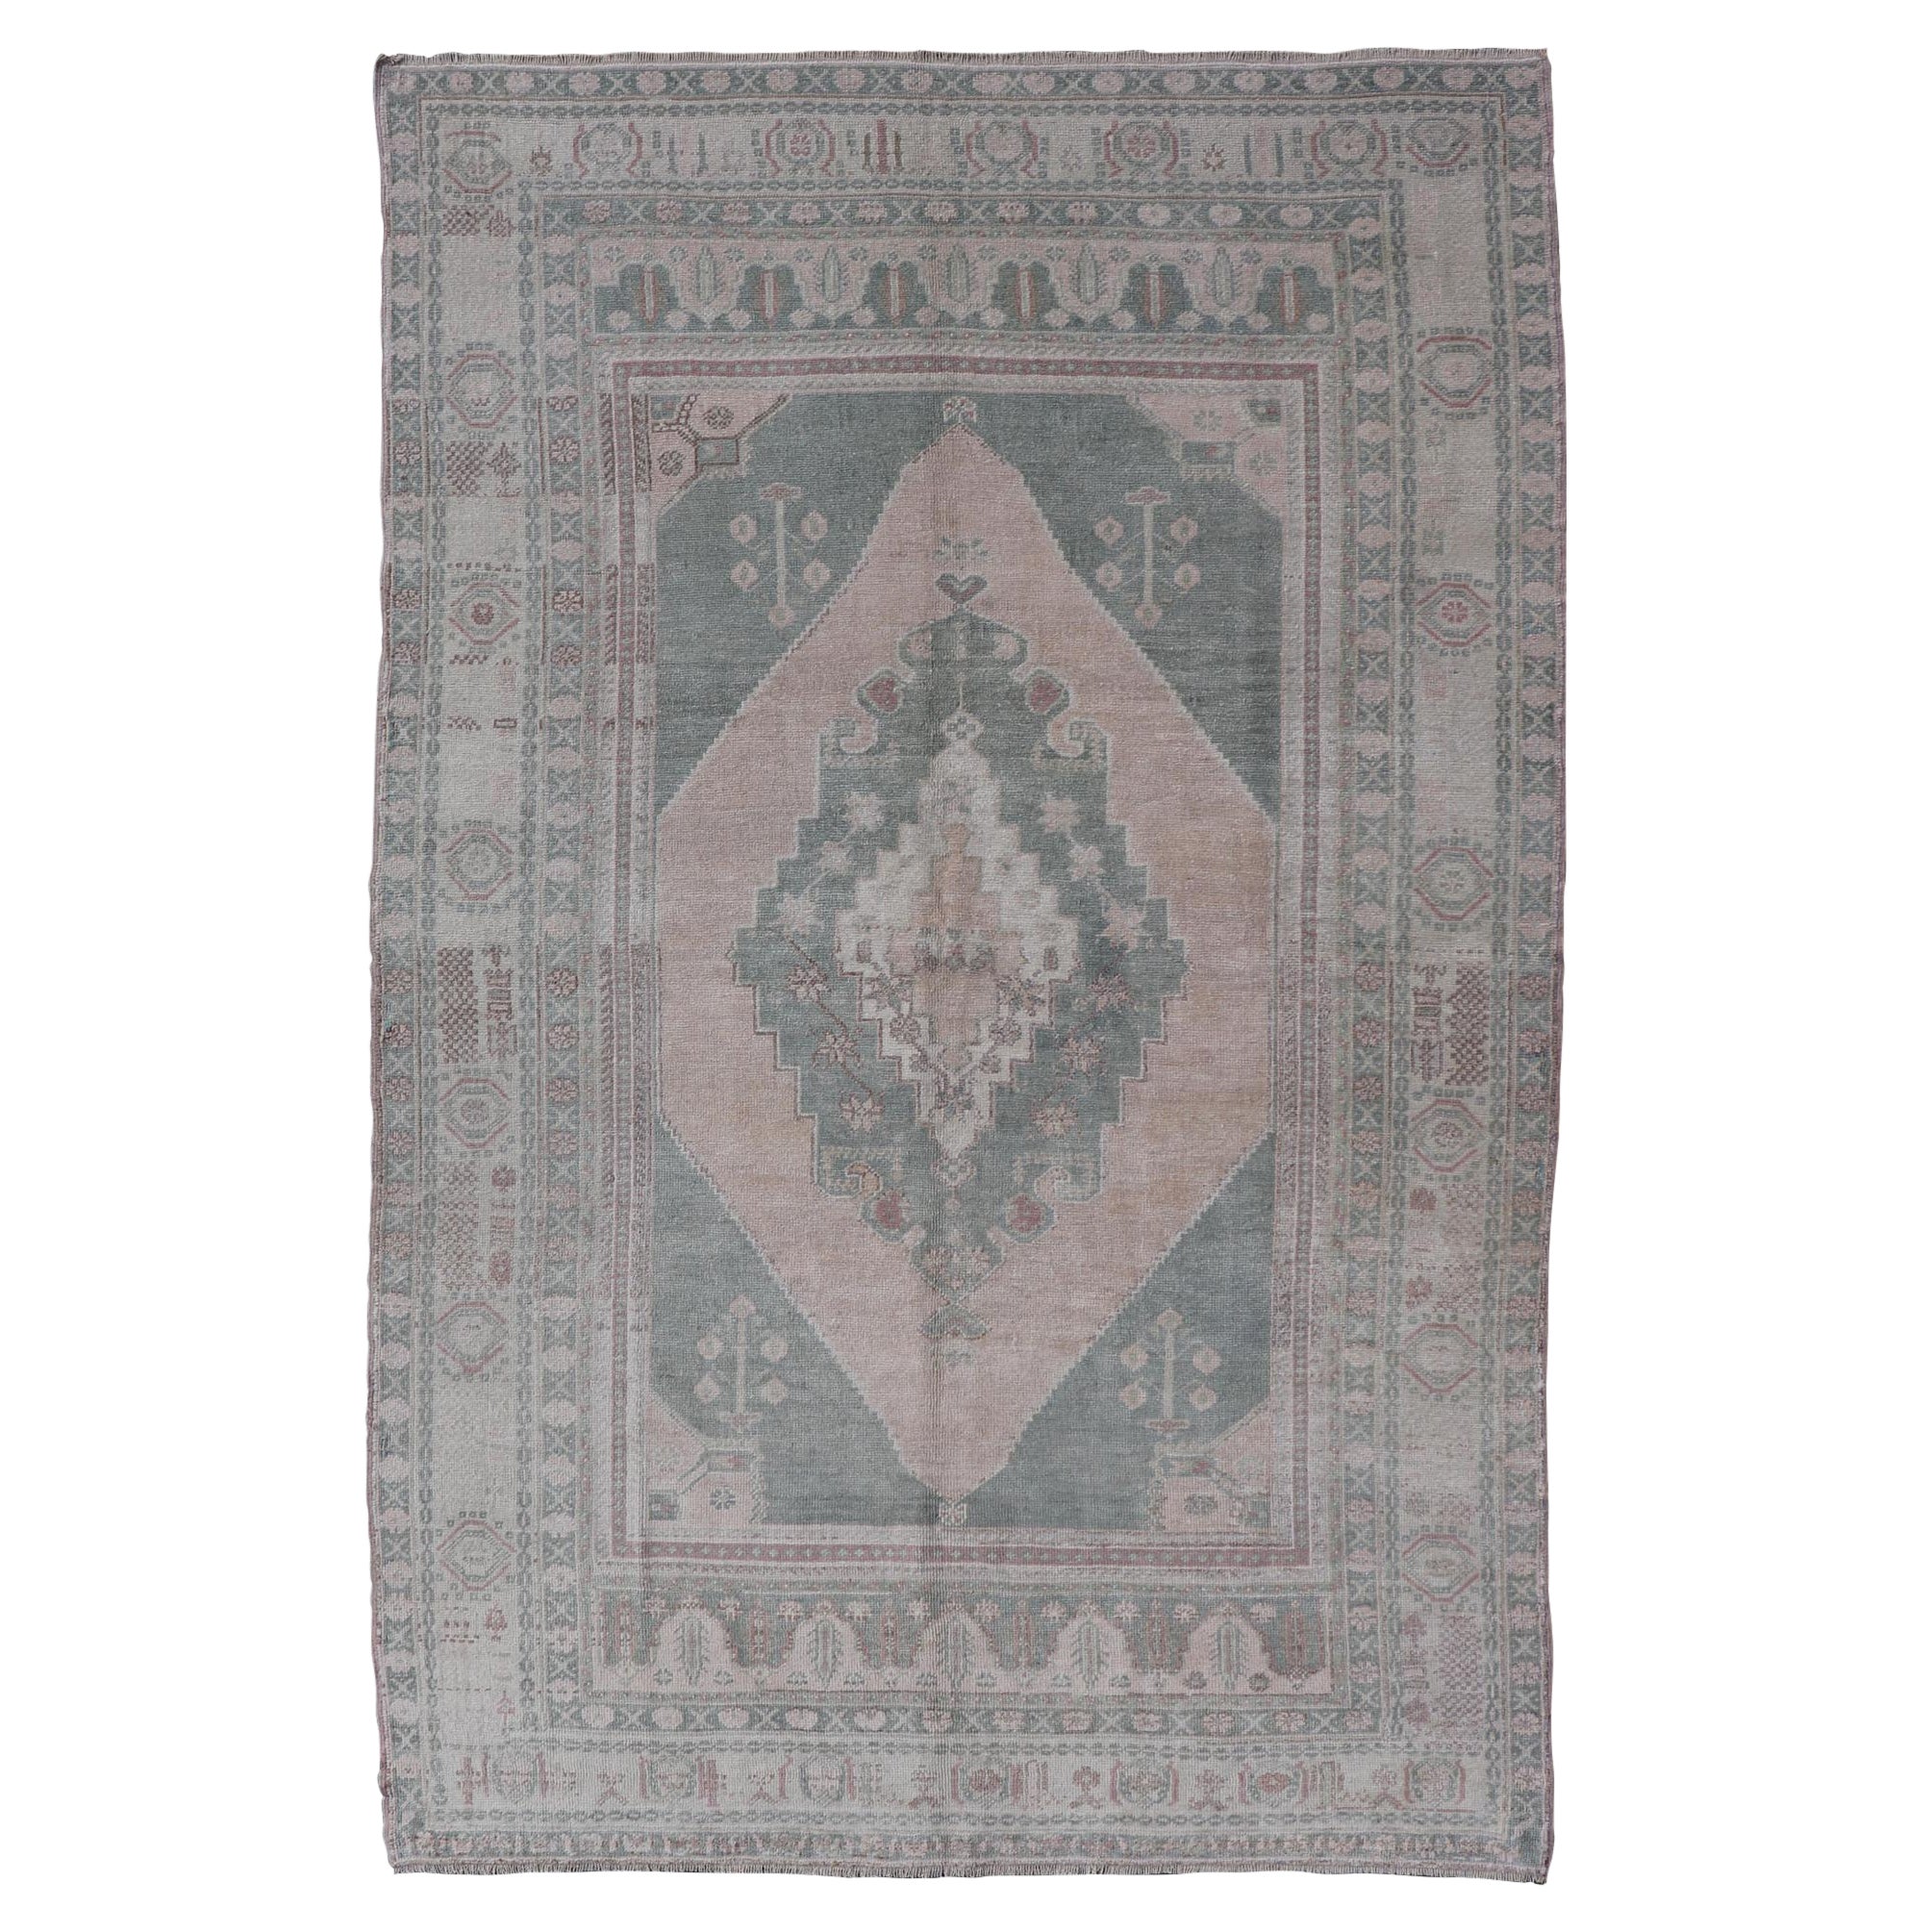 Vintage Oushak Rug in Muted Taupe, Lavender, Blush and Light Brown